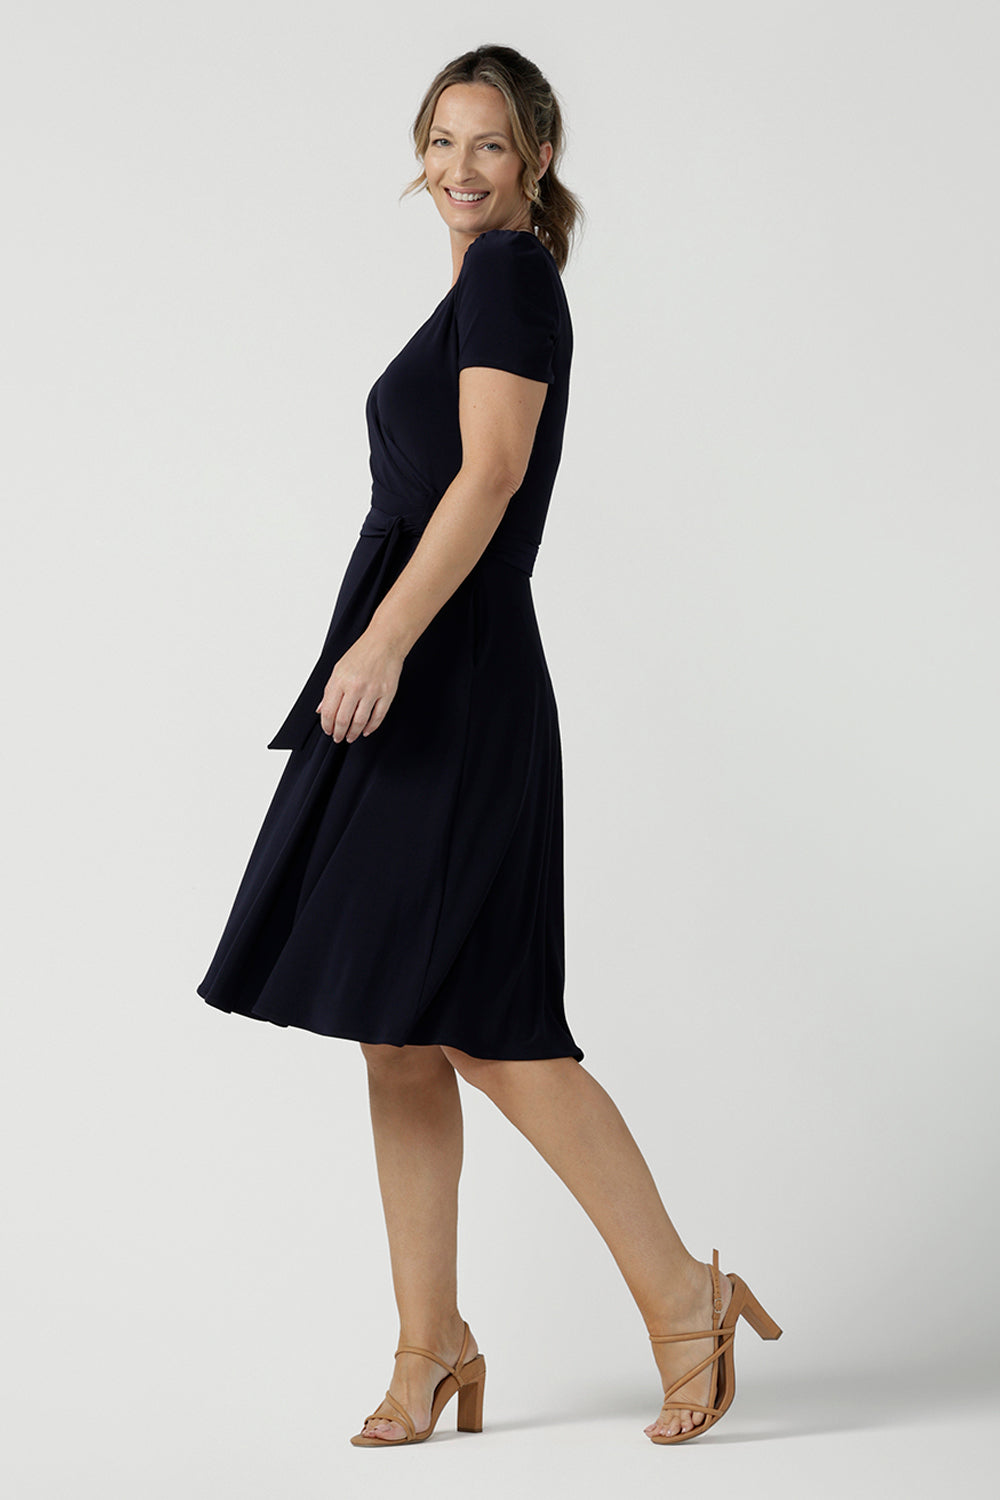 An over 40, size 10 woman wearing a navy, wrap dress with short sleeves. A great dress for summer casual wear, or for travel. Shop made in Australia dresses in petite to plus sizes online at Australian fashion brand, Leina & Fleur.